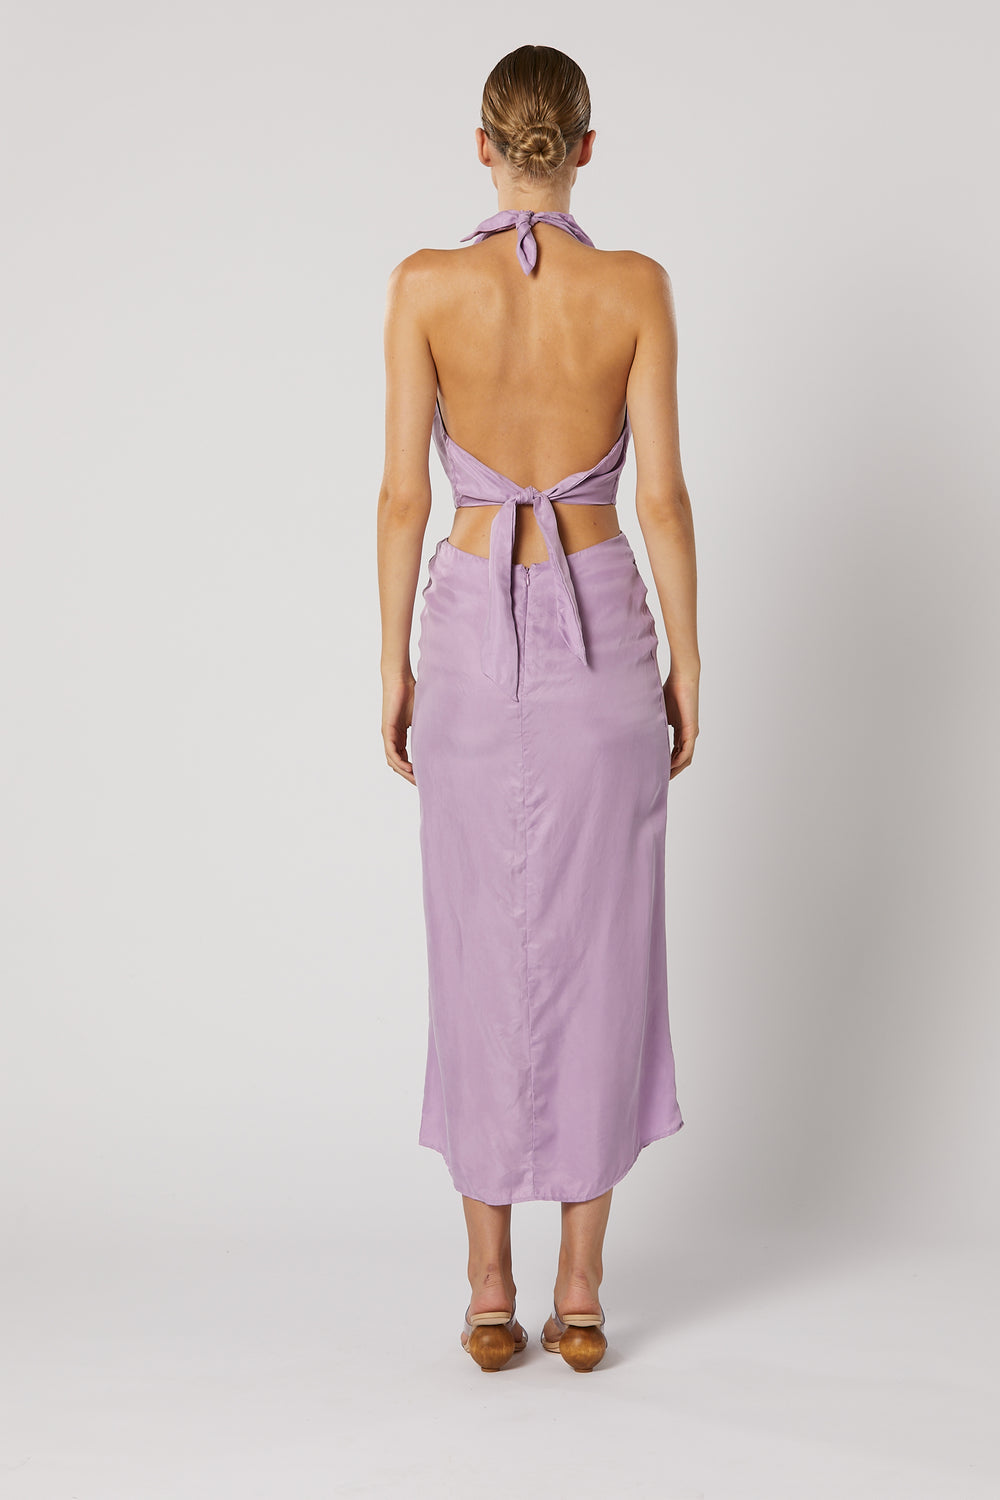 Lilac Slinky Cowl Backless Halter Neck Long Top